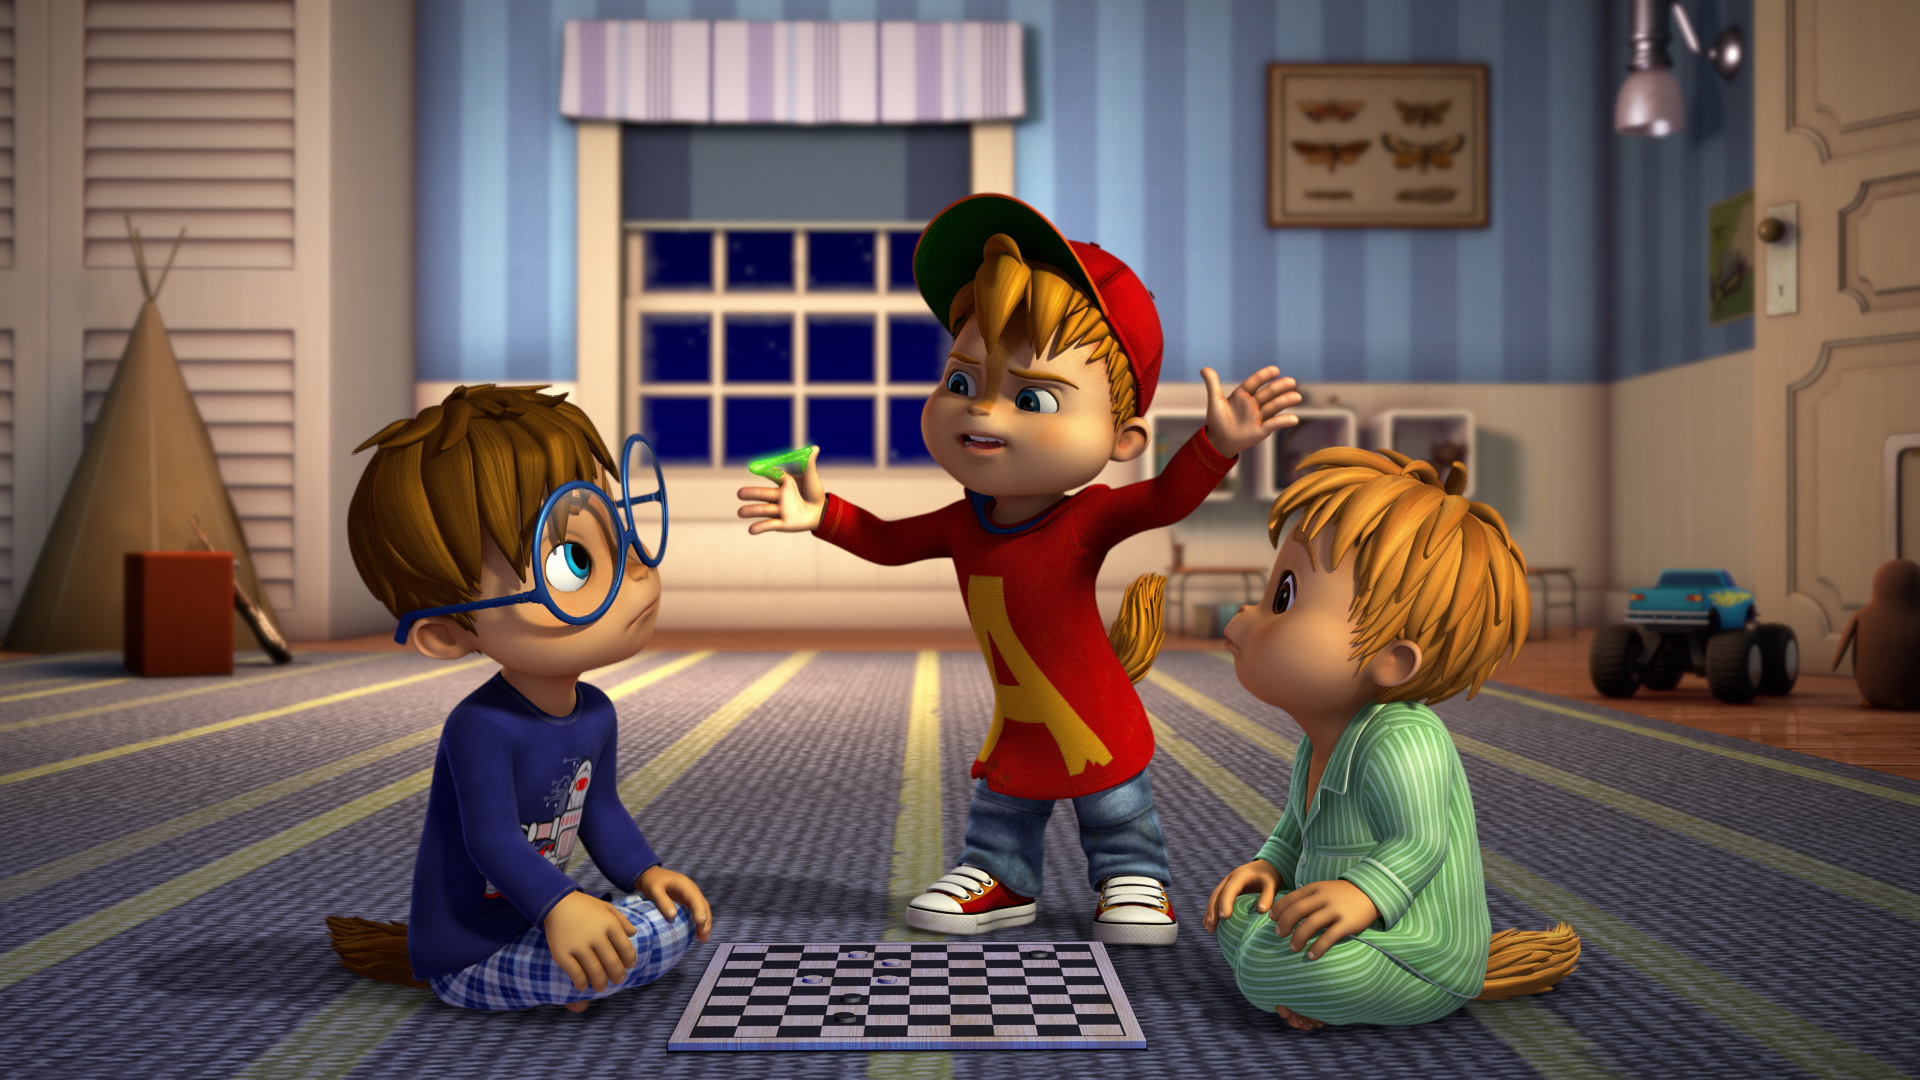 Watch ALVINNN!!! and The Chipmunks Season 1 Episode 2: A is for  Alien/Jeanette Enchanted - Full show on Paramount Plus